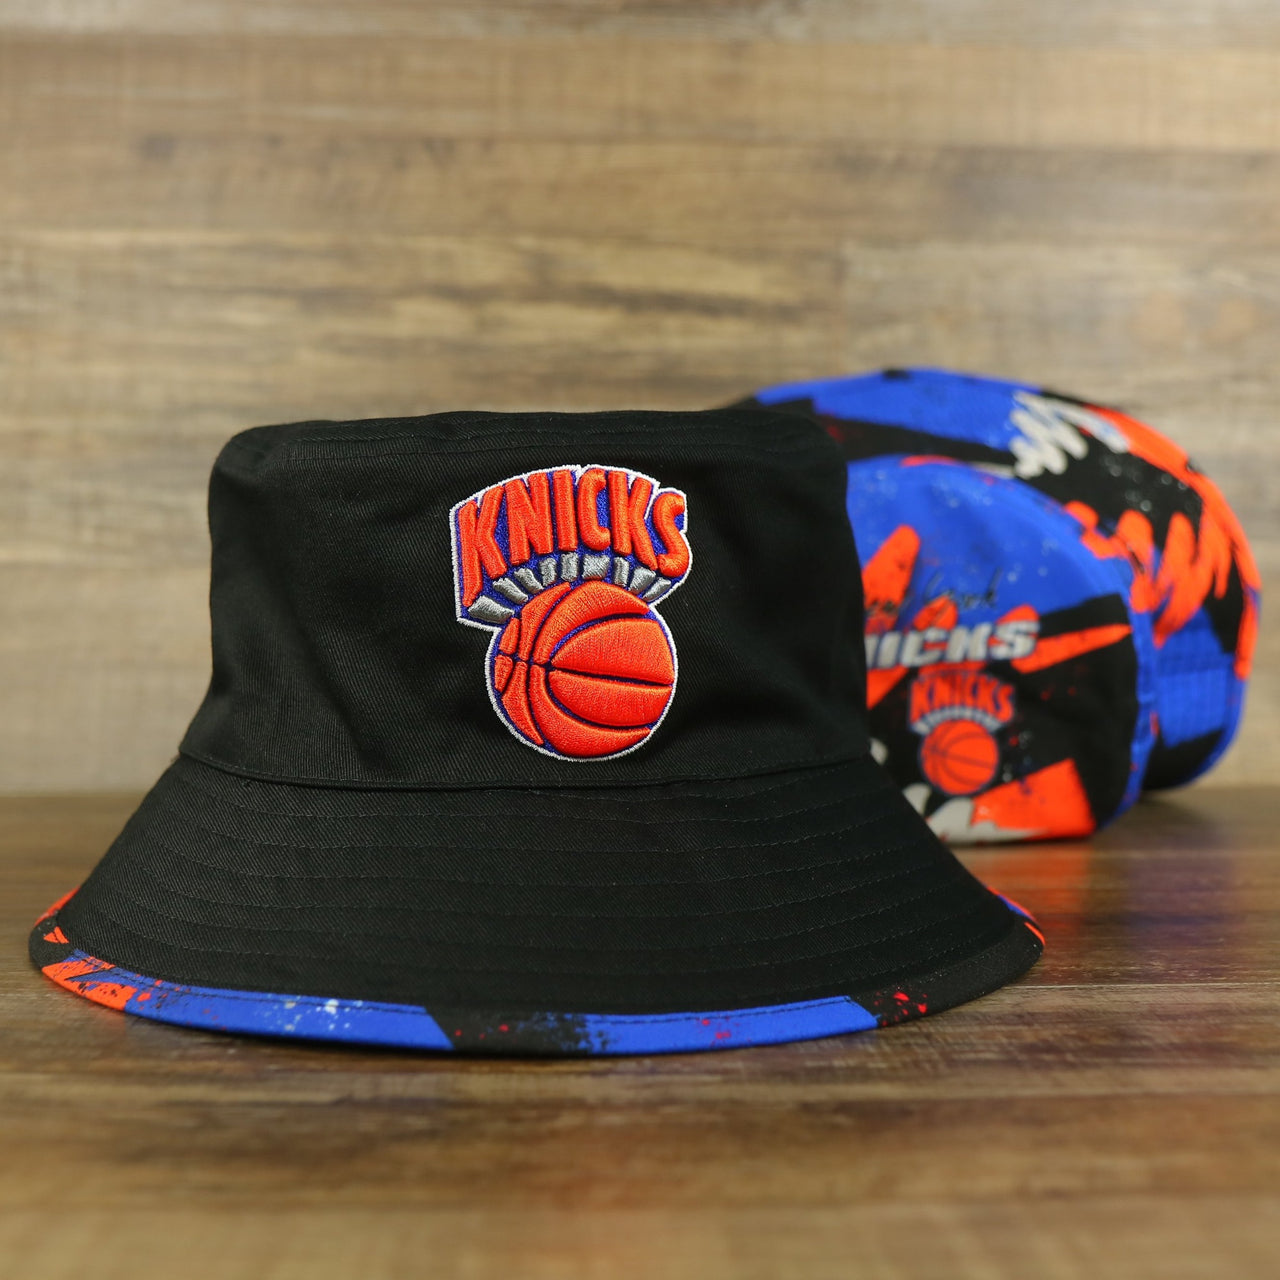 New York Knicks 90s Inspired NBA Hyper Mitchell and Ness Reversible Bucket Hat